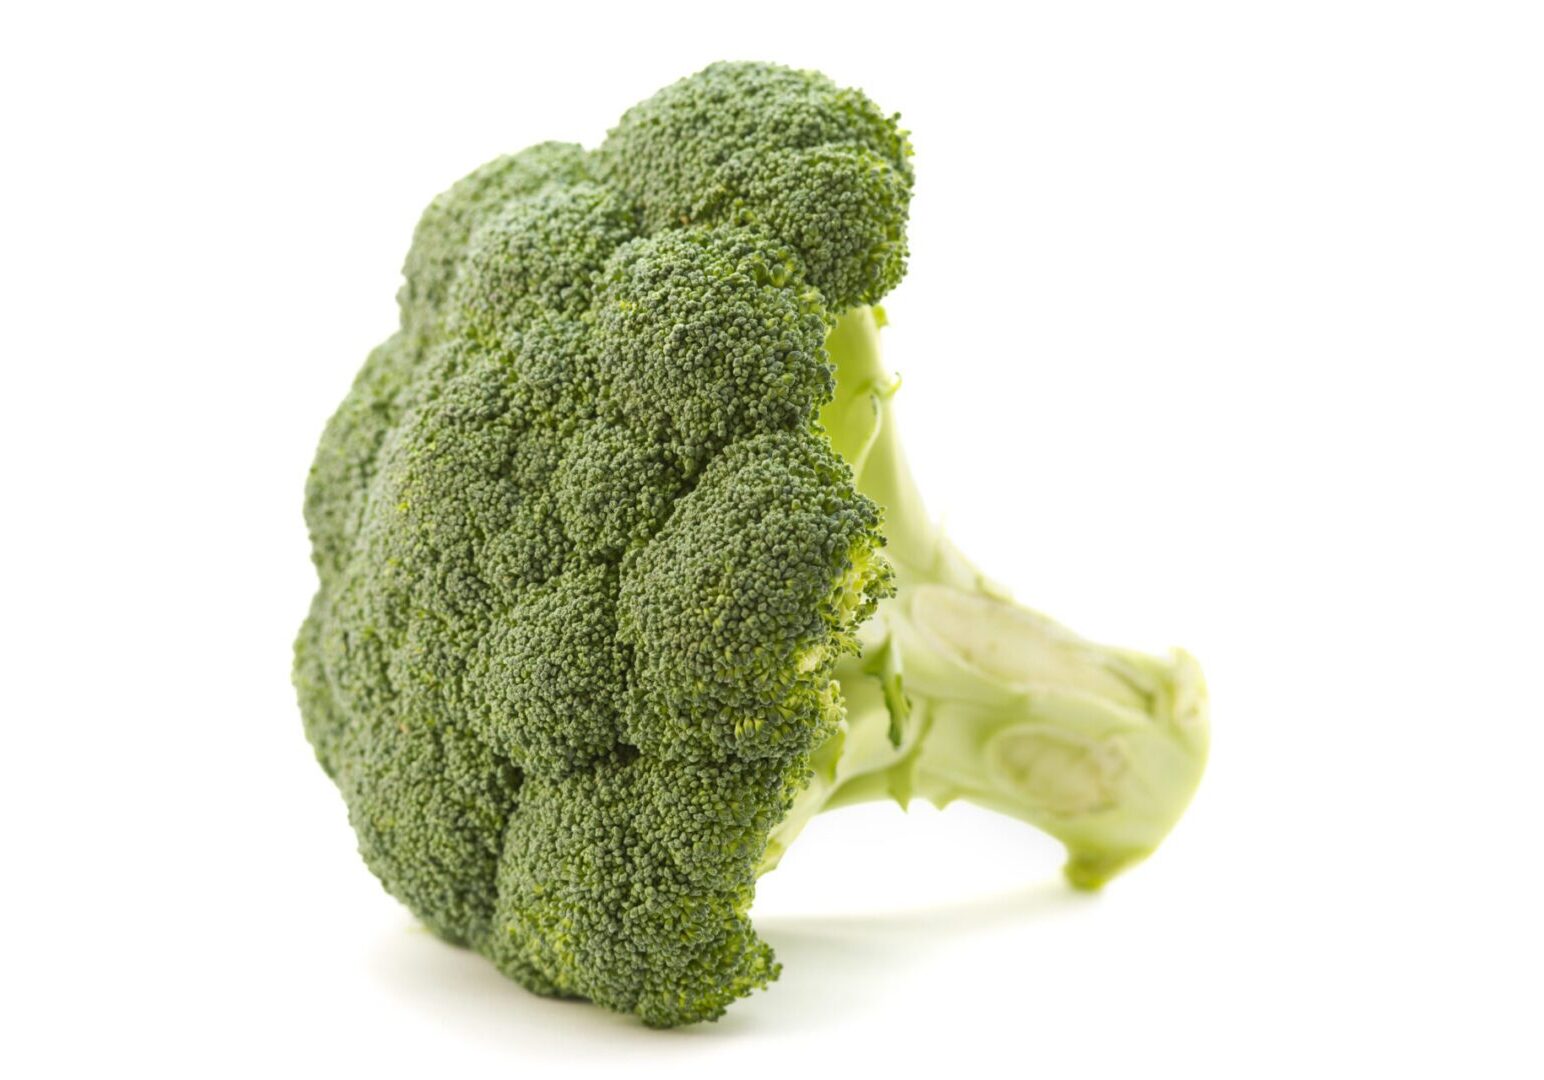 A close-up of a broccoli on white background.Broccoli is a plant in the cabbage family, whose large flower head is used as a vegetable.